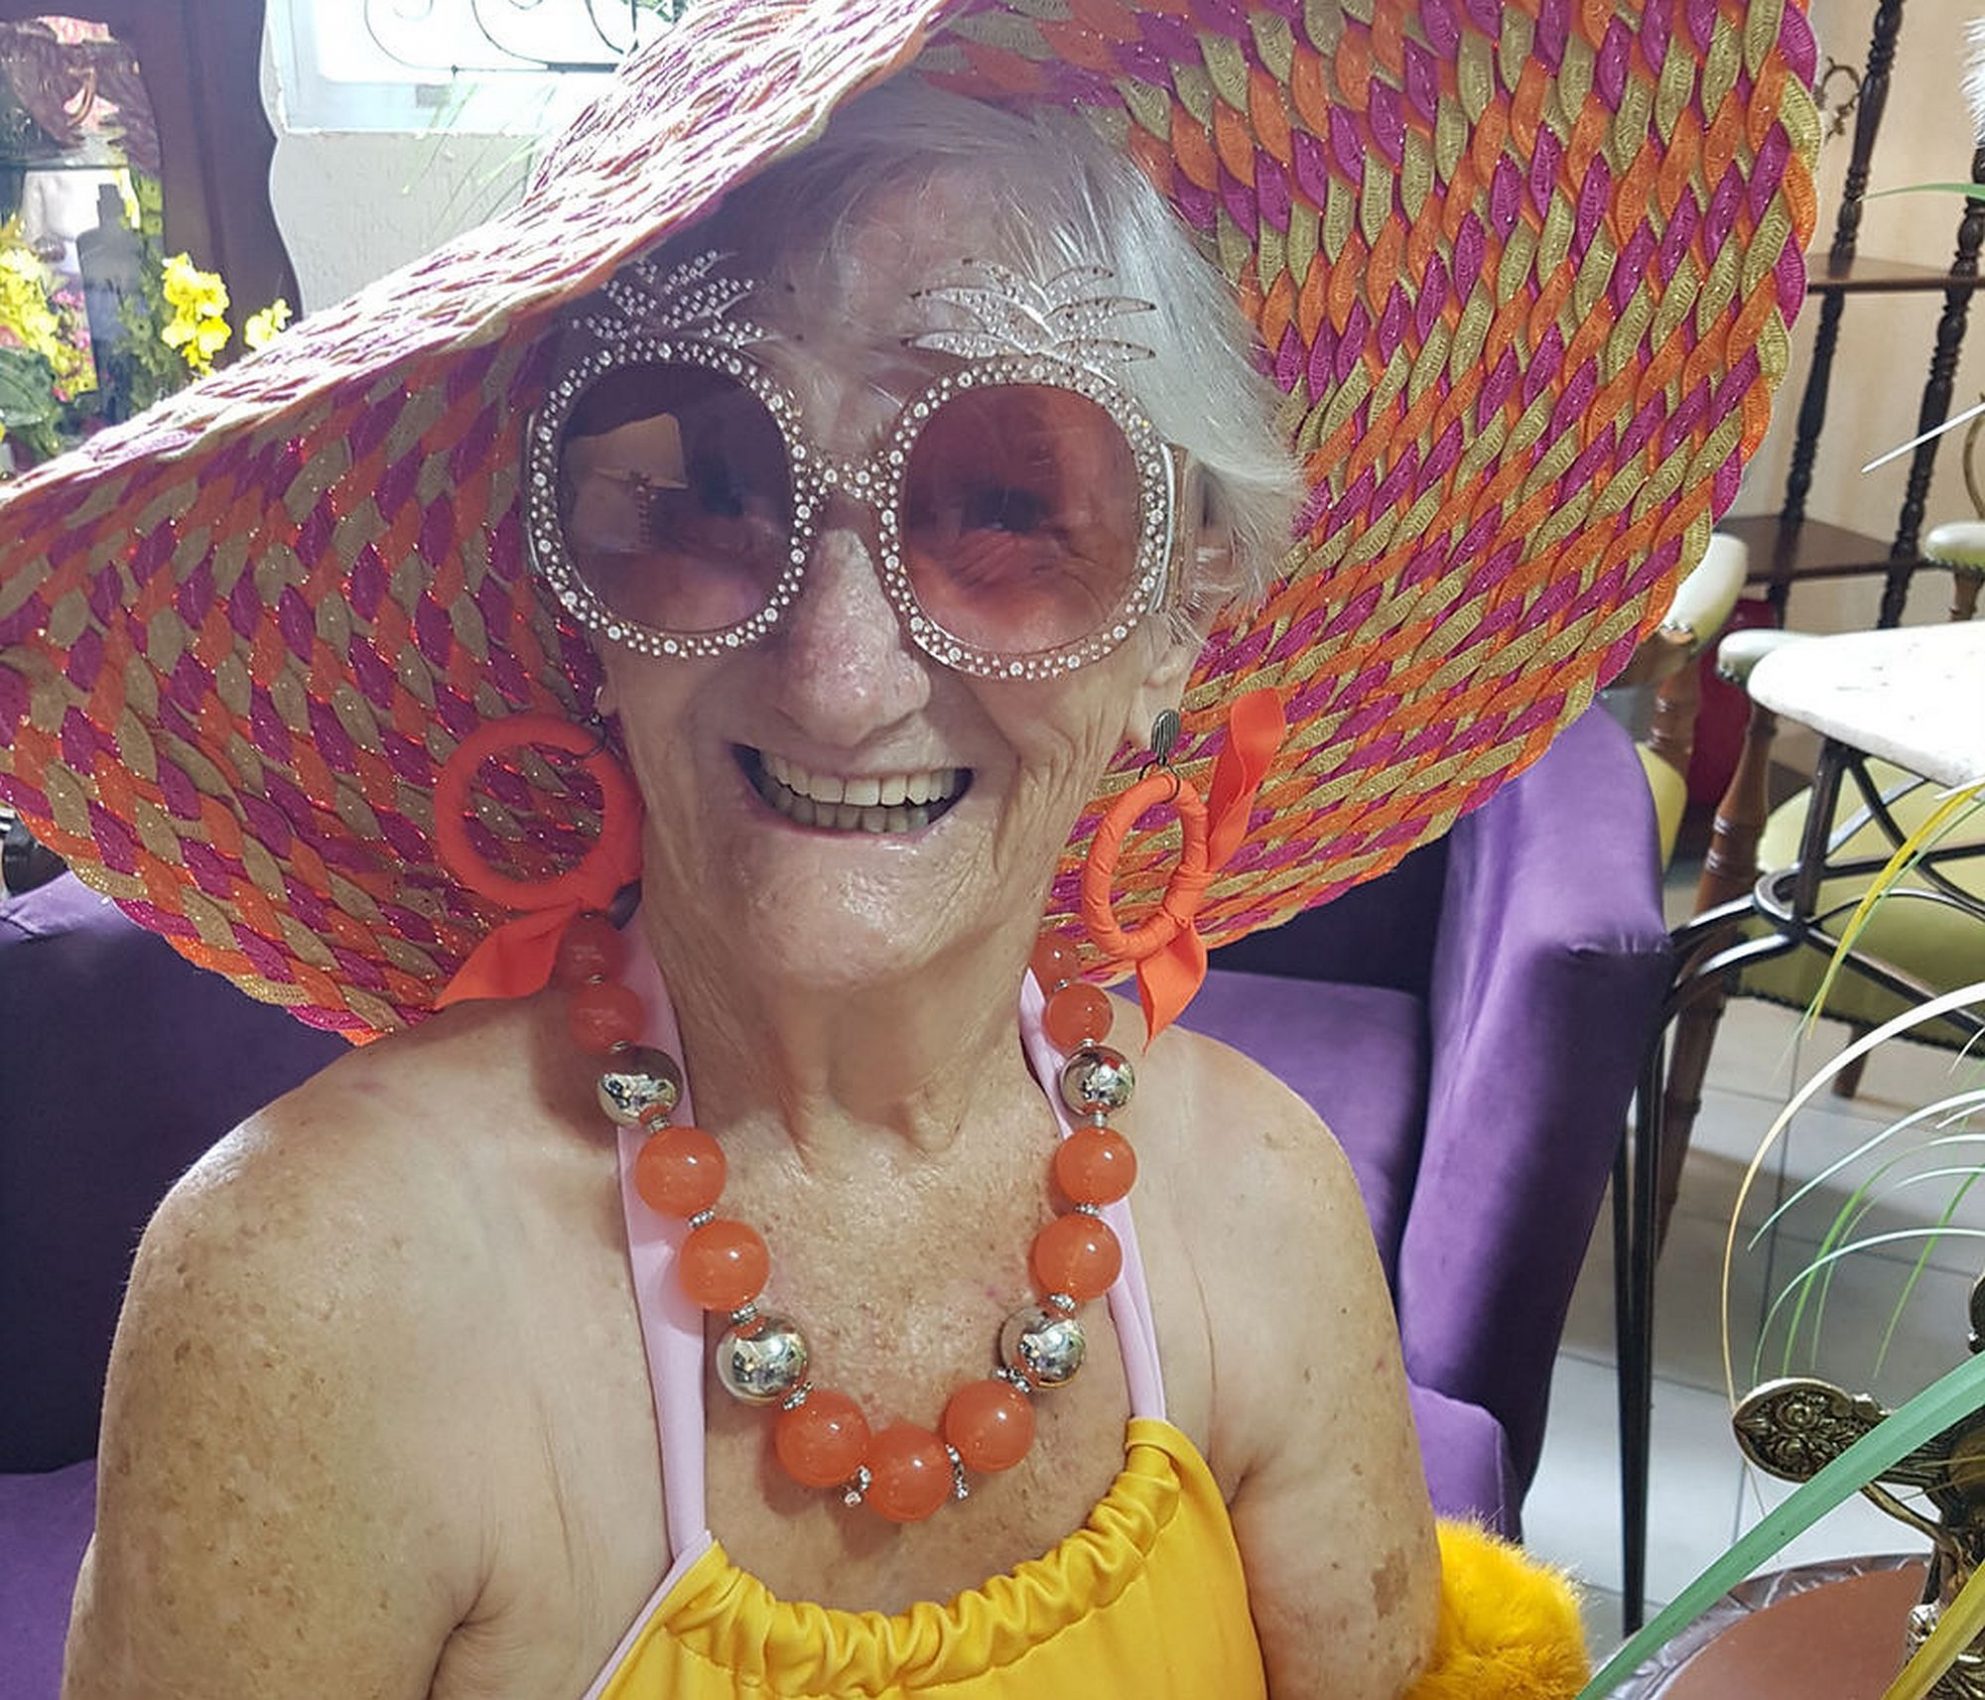 At age 78, Grandma of Brazil becomes an influencer of fashion and behavior on Instagram